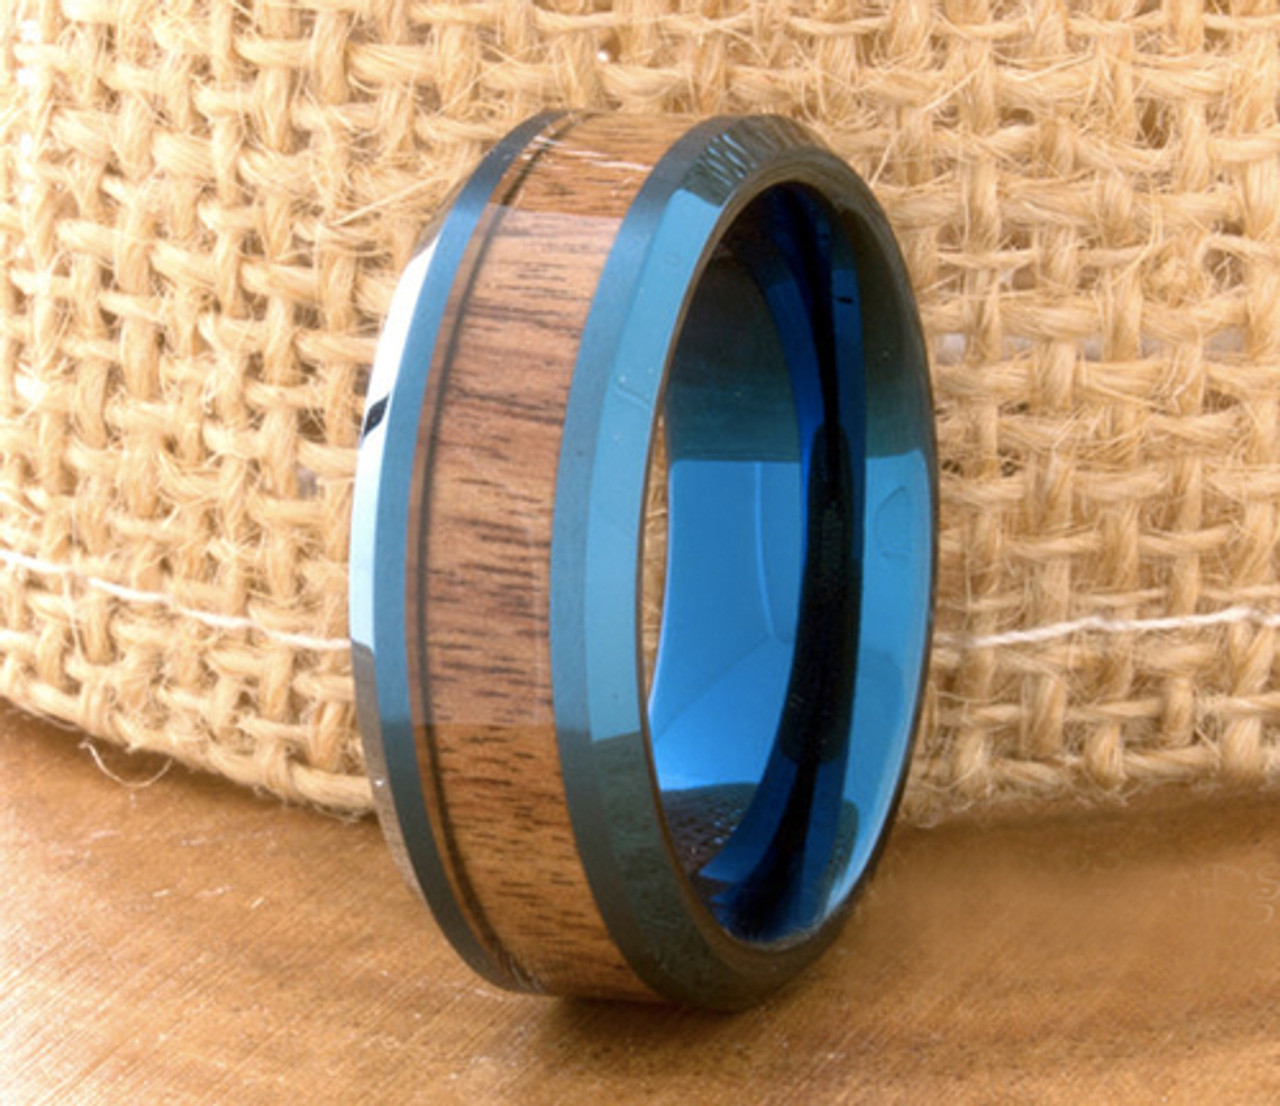 (8mm) Unisex or Men's Tungsten Carbide Wedding Ring Bands. Blue Band with Dark Wood Inlay. High Polish Ring with Beveled Edges.